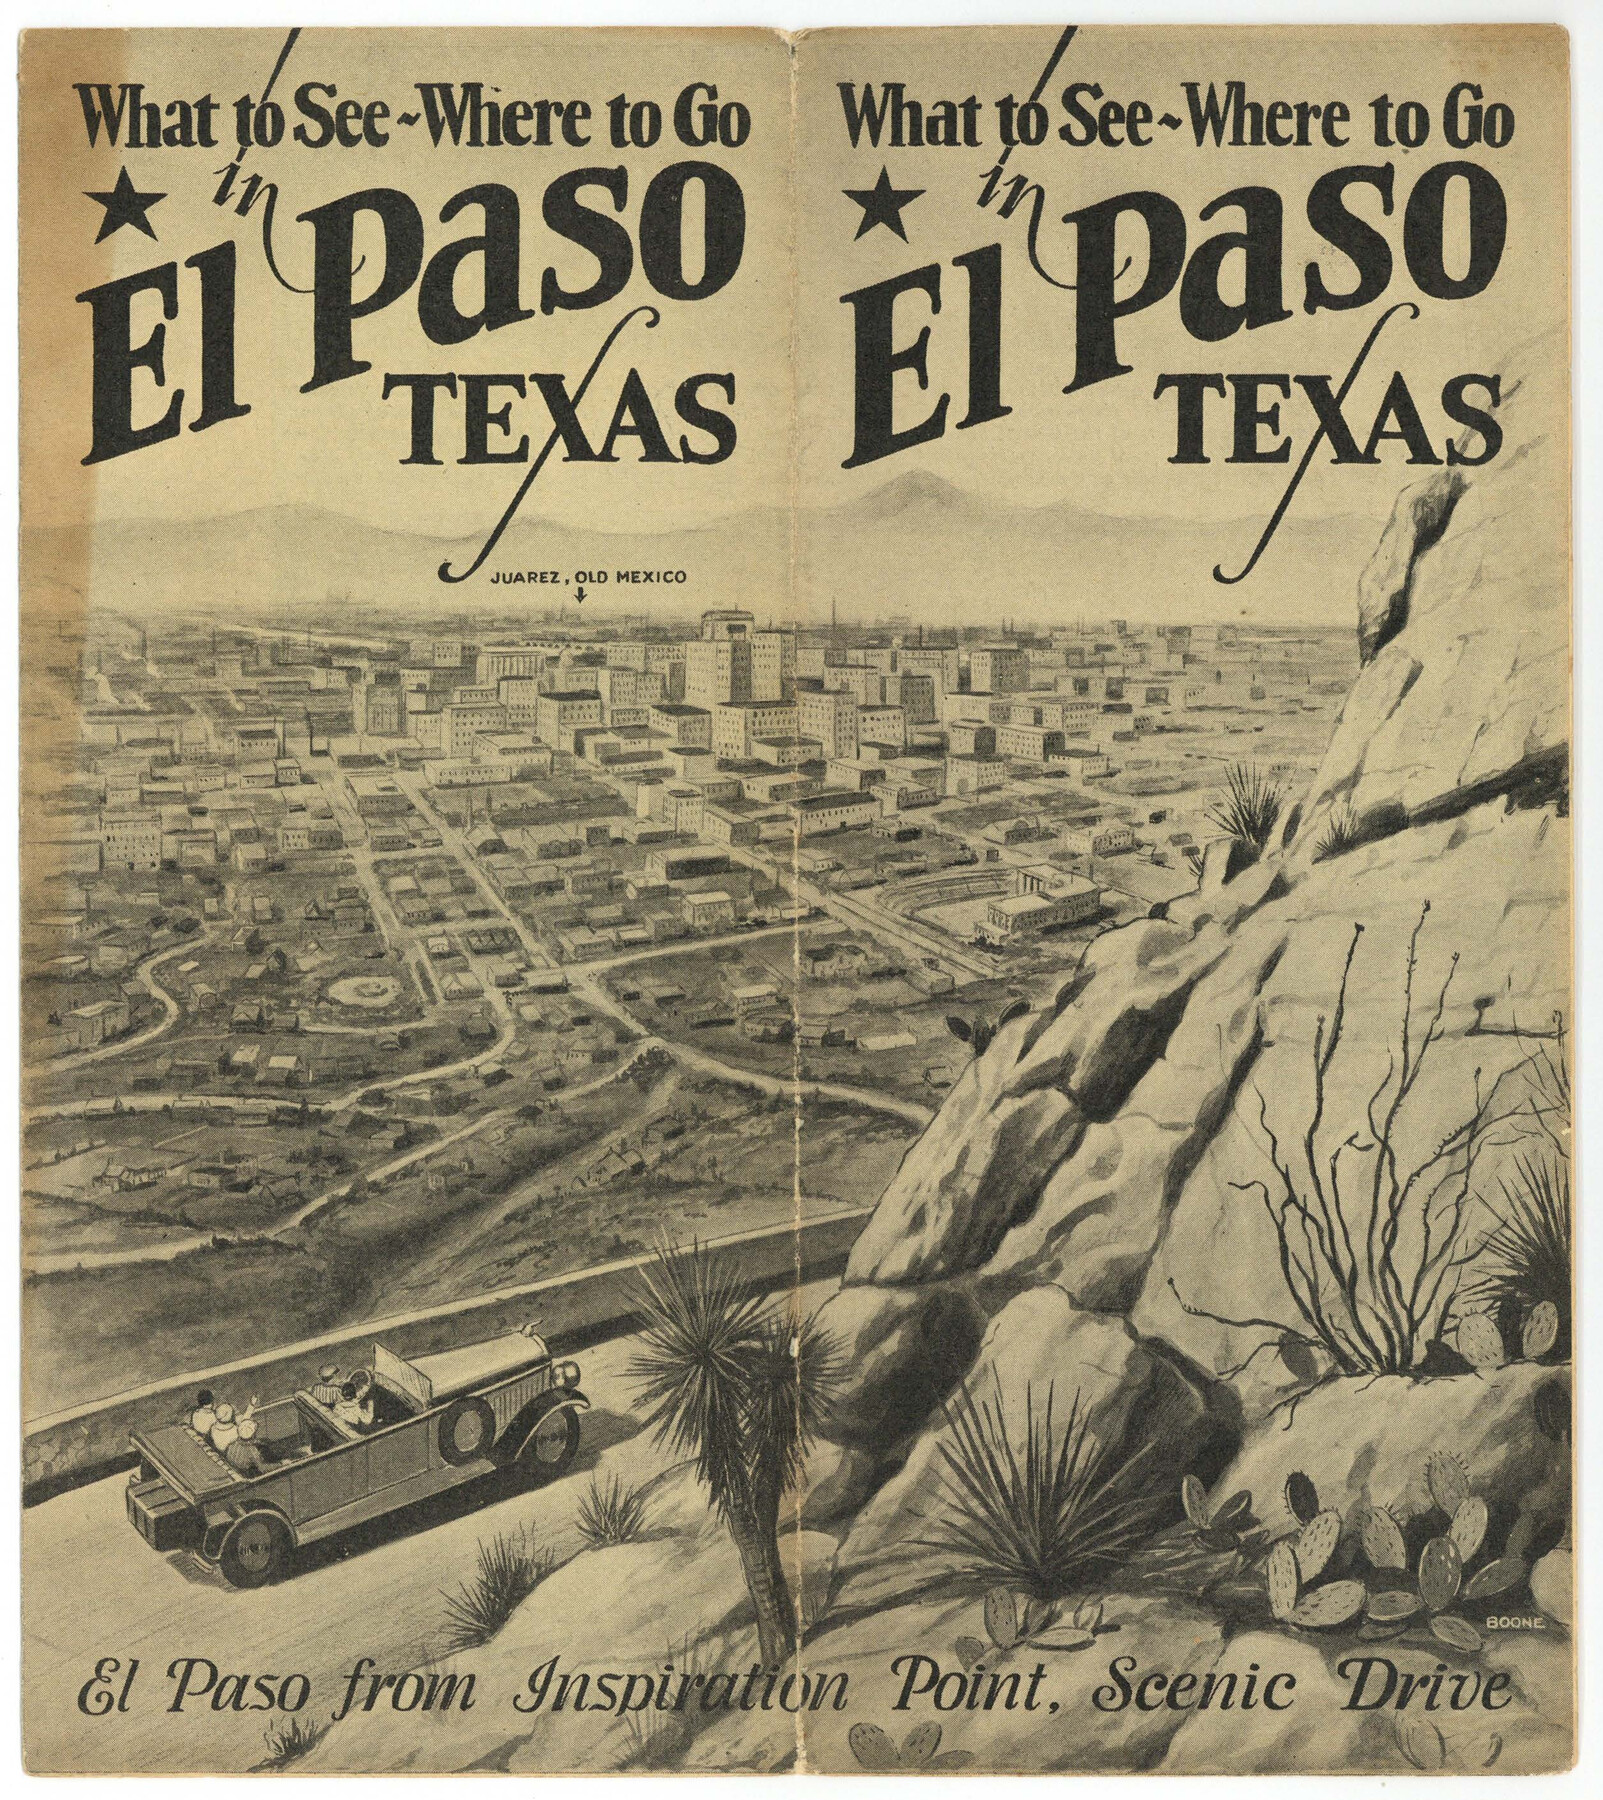 97048, What to See - Where to Go in El Paso, Texas